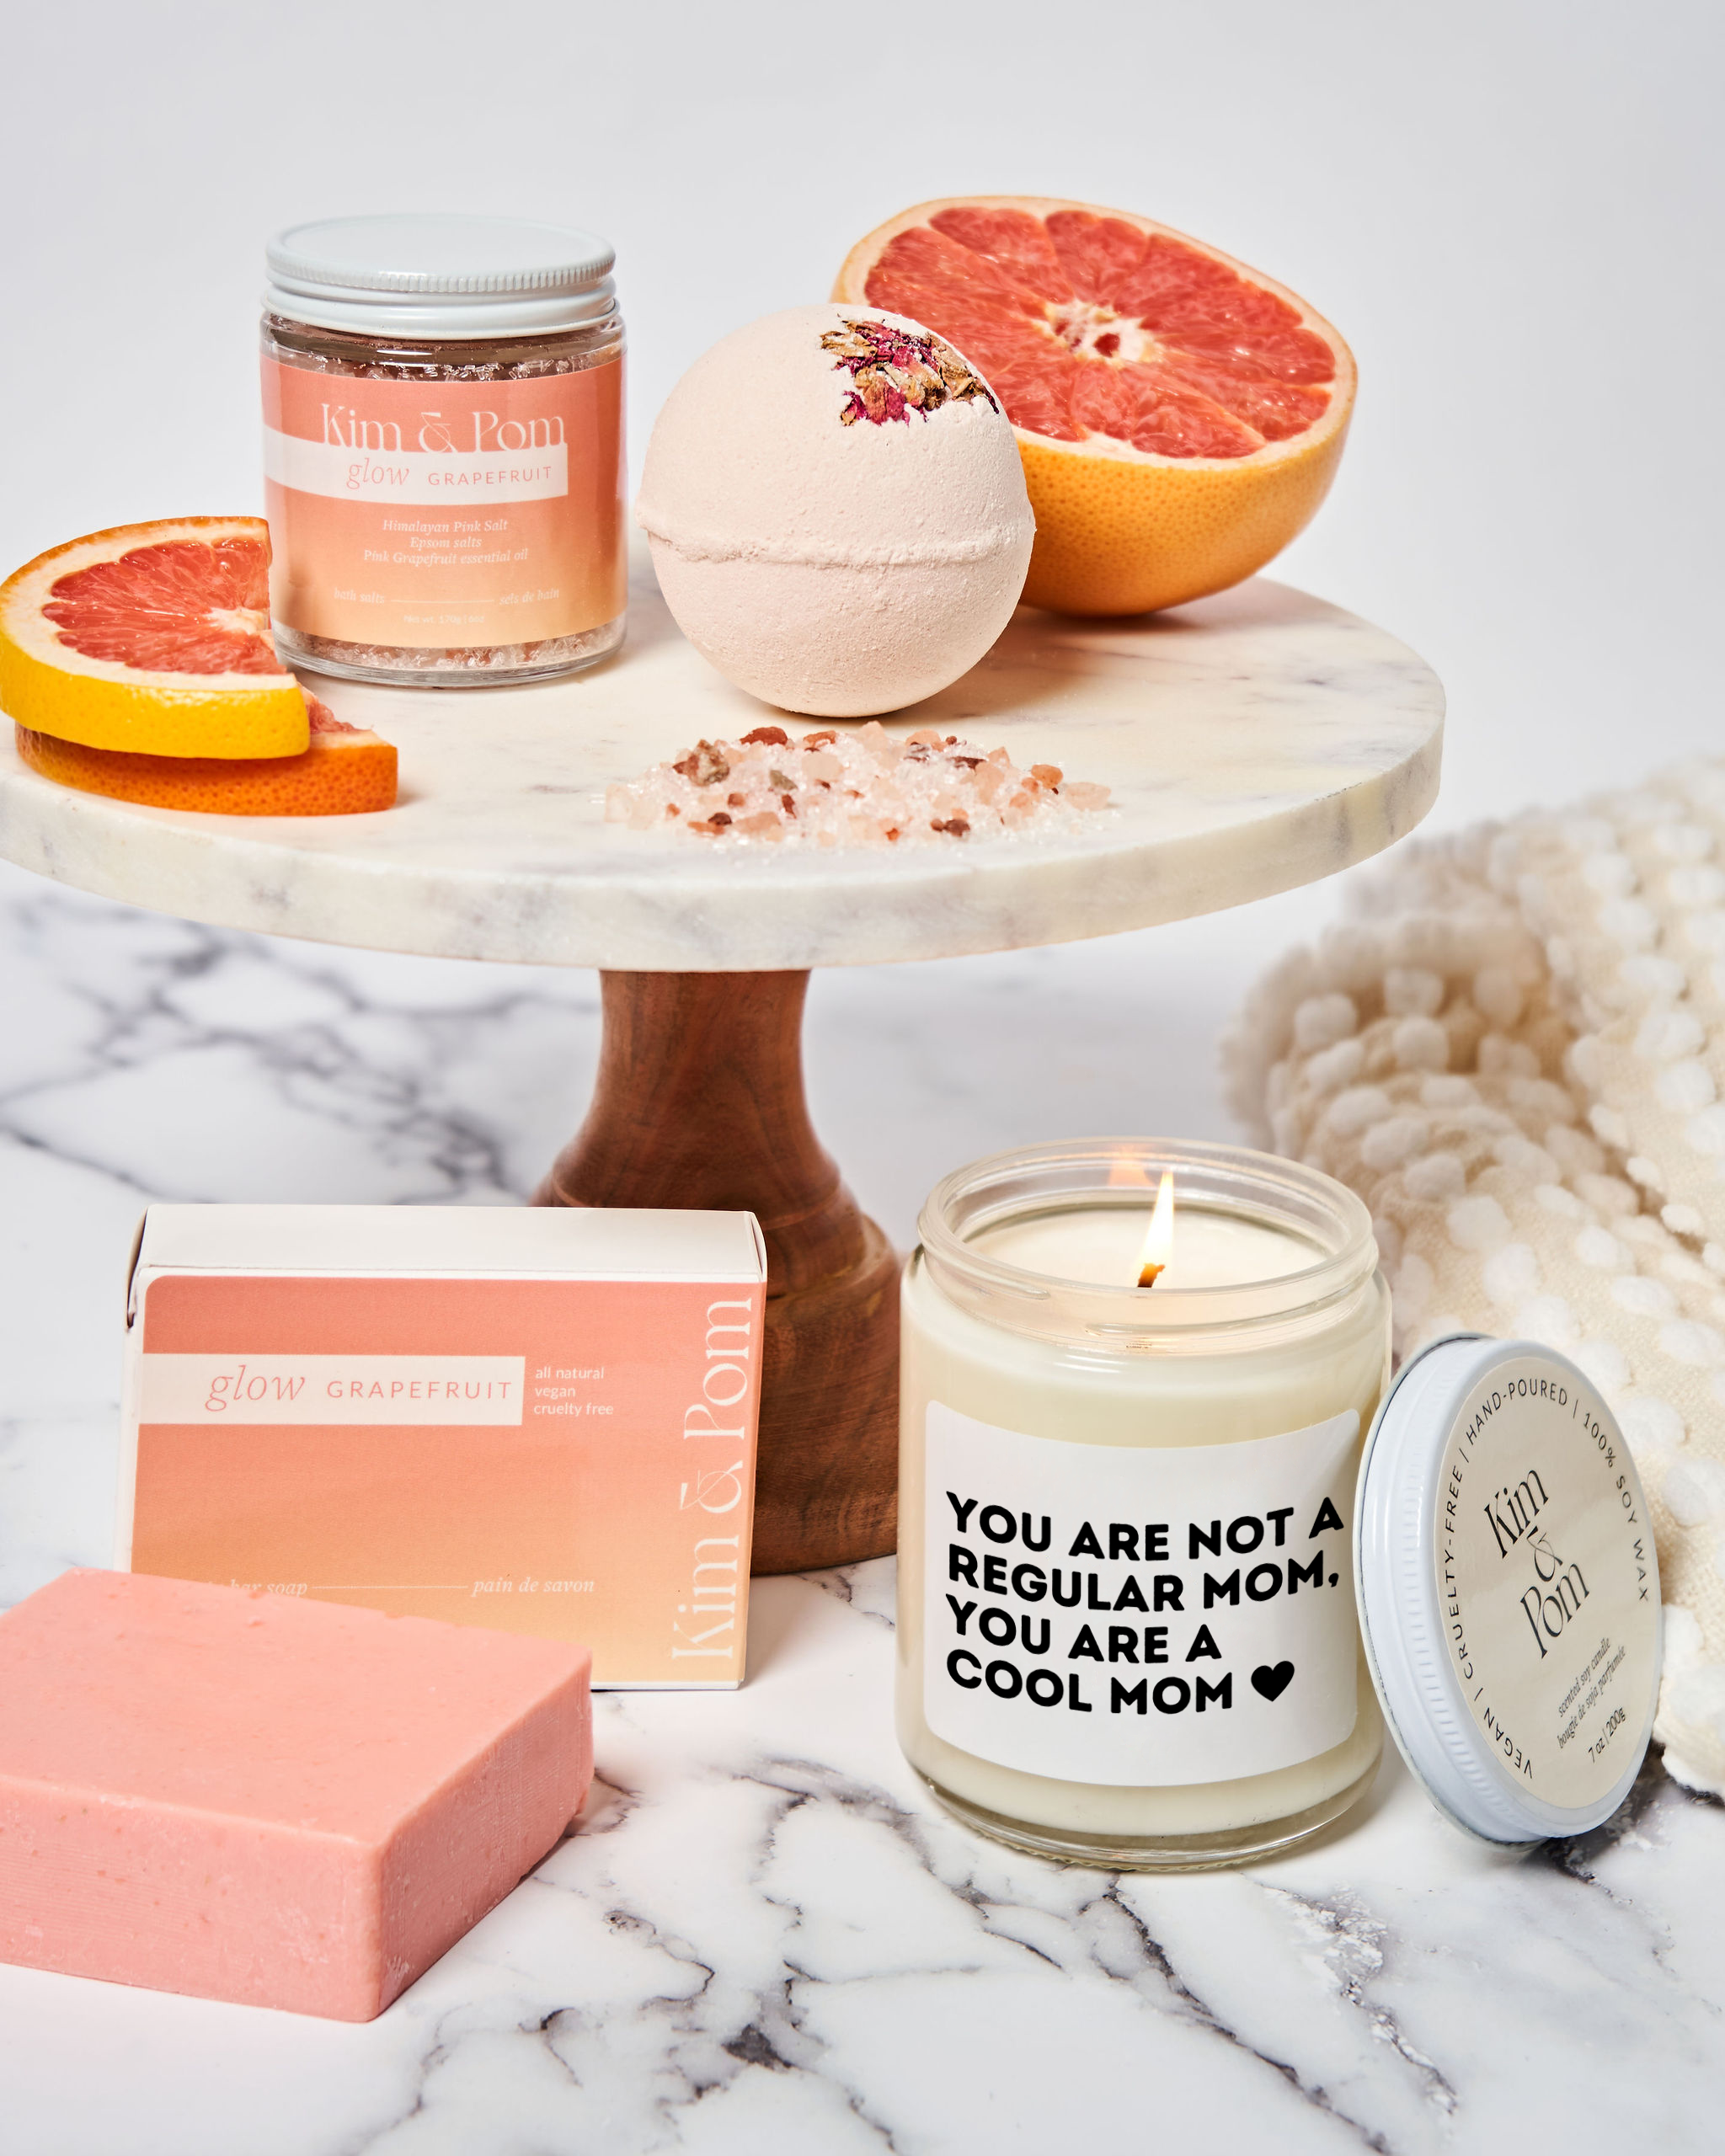 Pink Grapefruit gift box with a candle that has a label with text saying "You are not a regular mom, you are a cool mom".